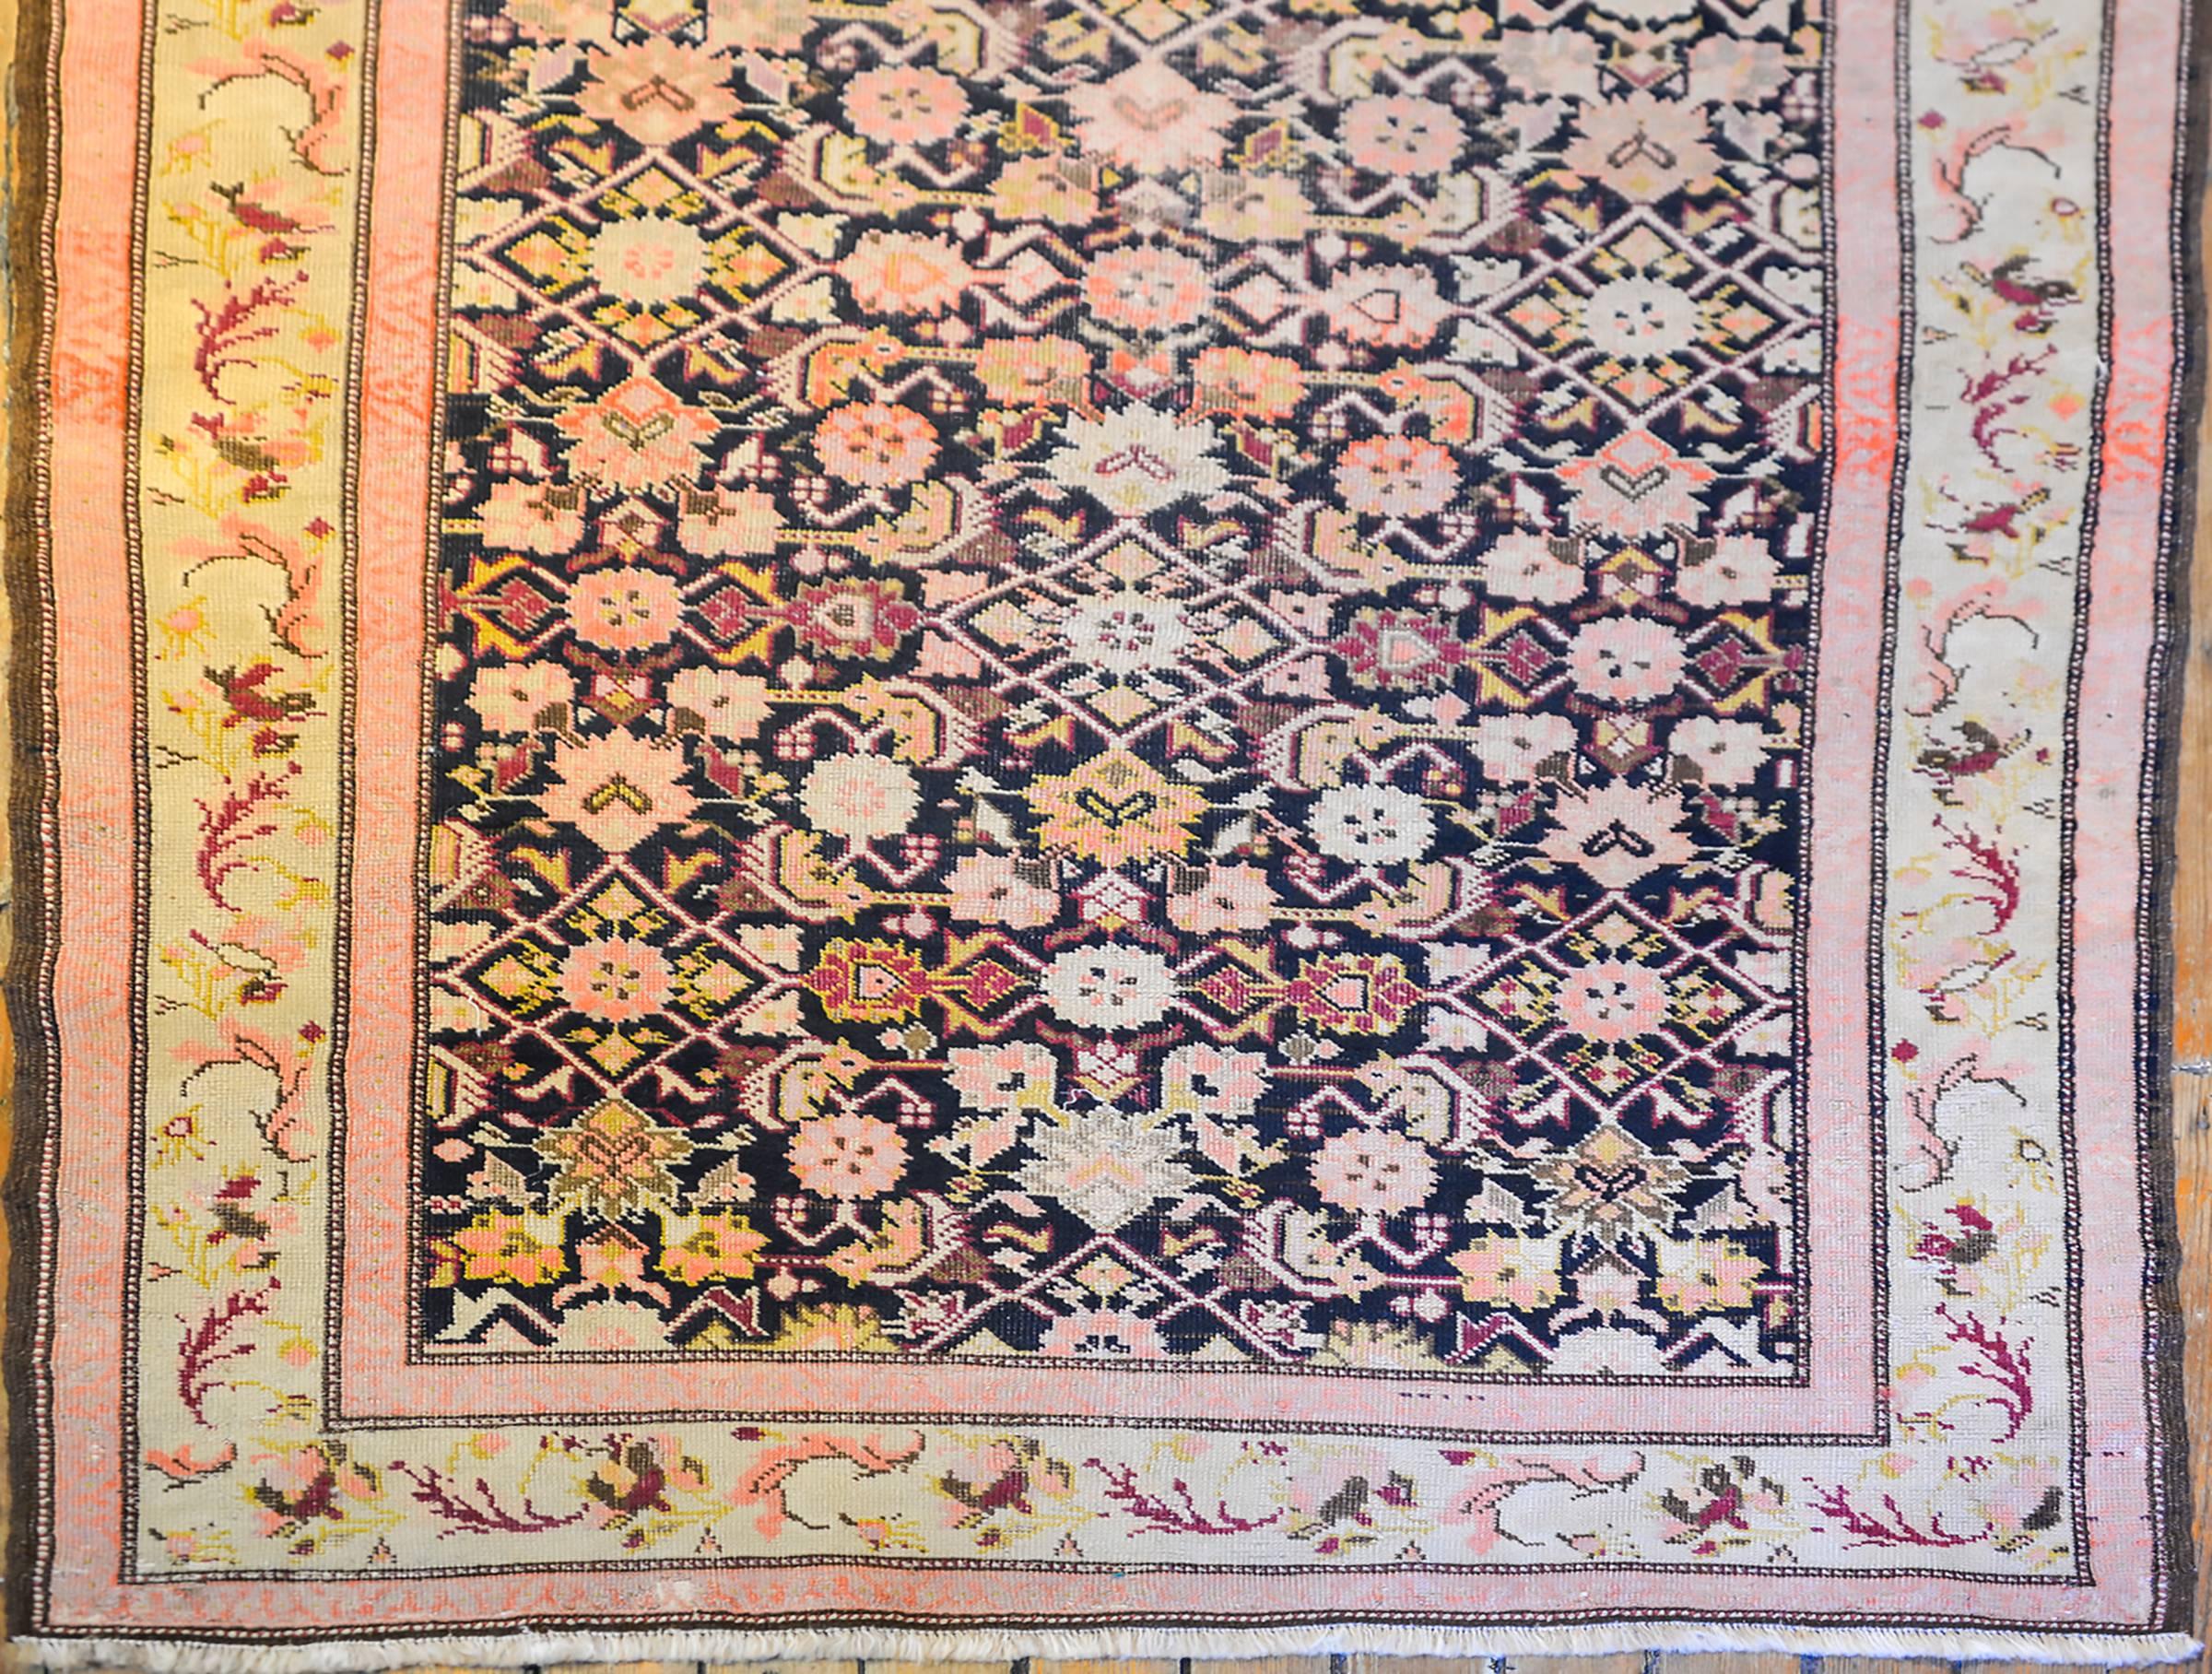 A late 19th century Persian Herati runner with an all-over lattice pattern composed of pink, gold, orange and yellow flowers and leaves. The border is sweet with wonderfully rendered leaves and flowers woven in similarly vegetables wool.